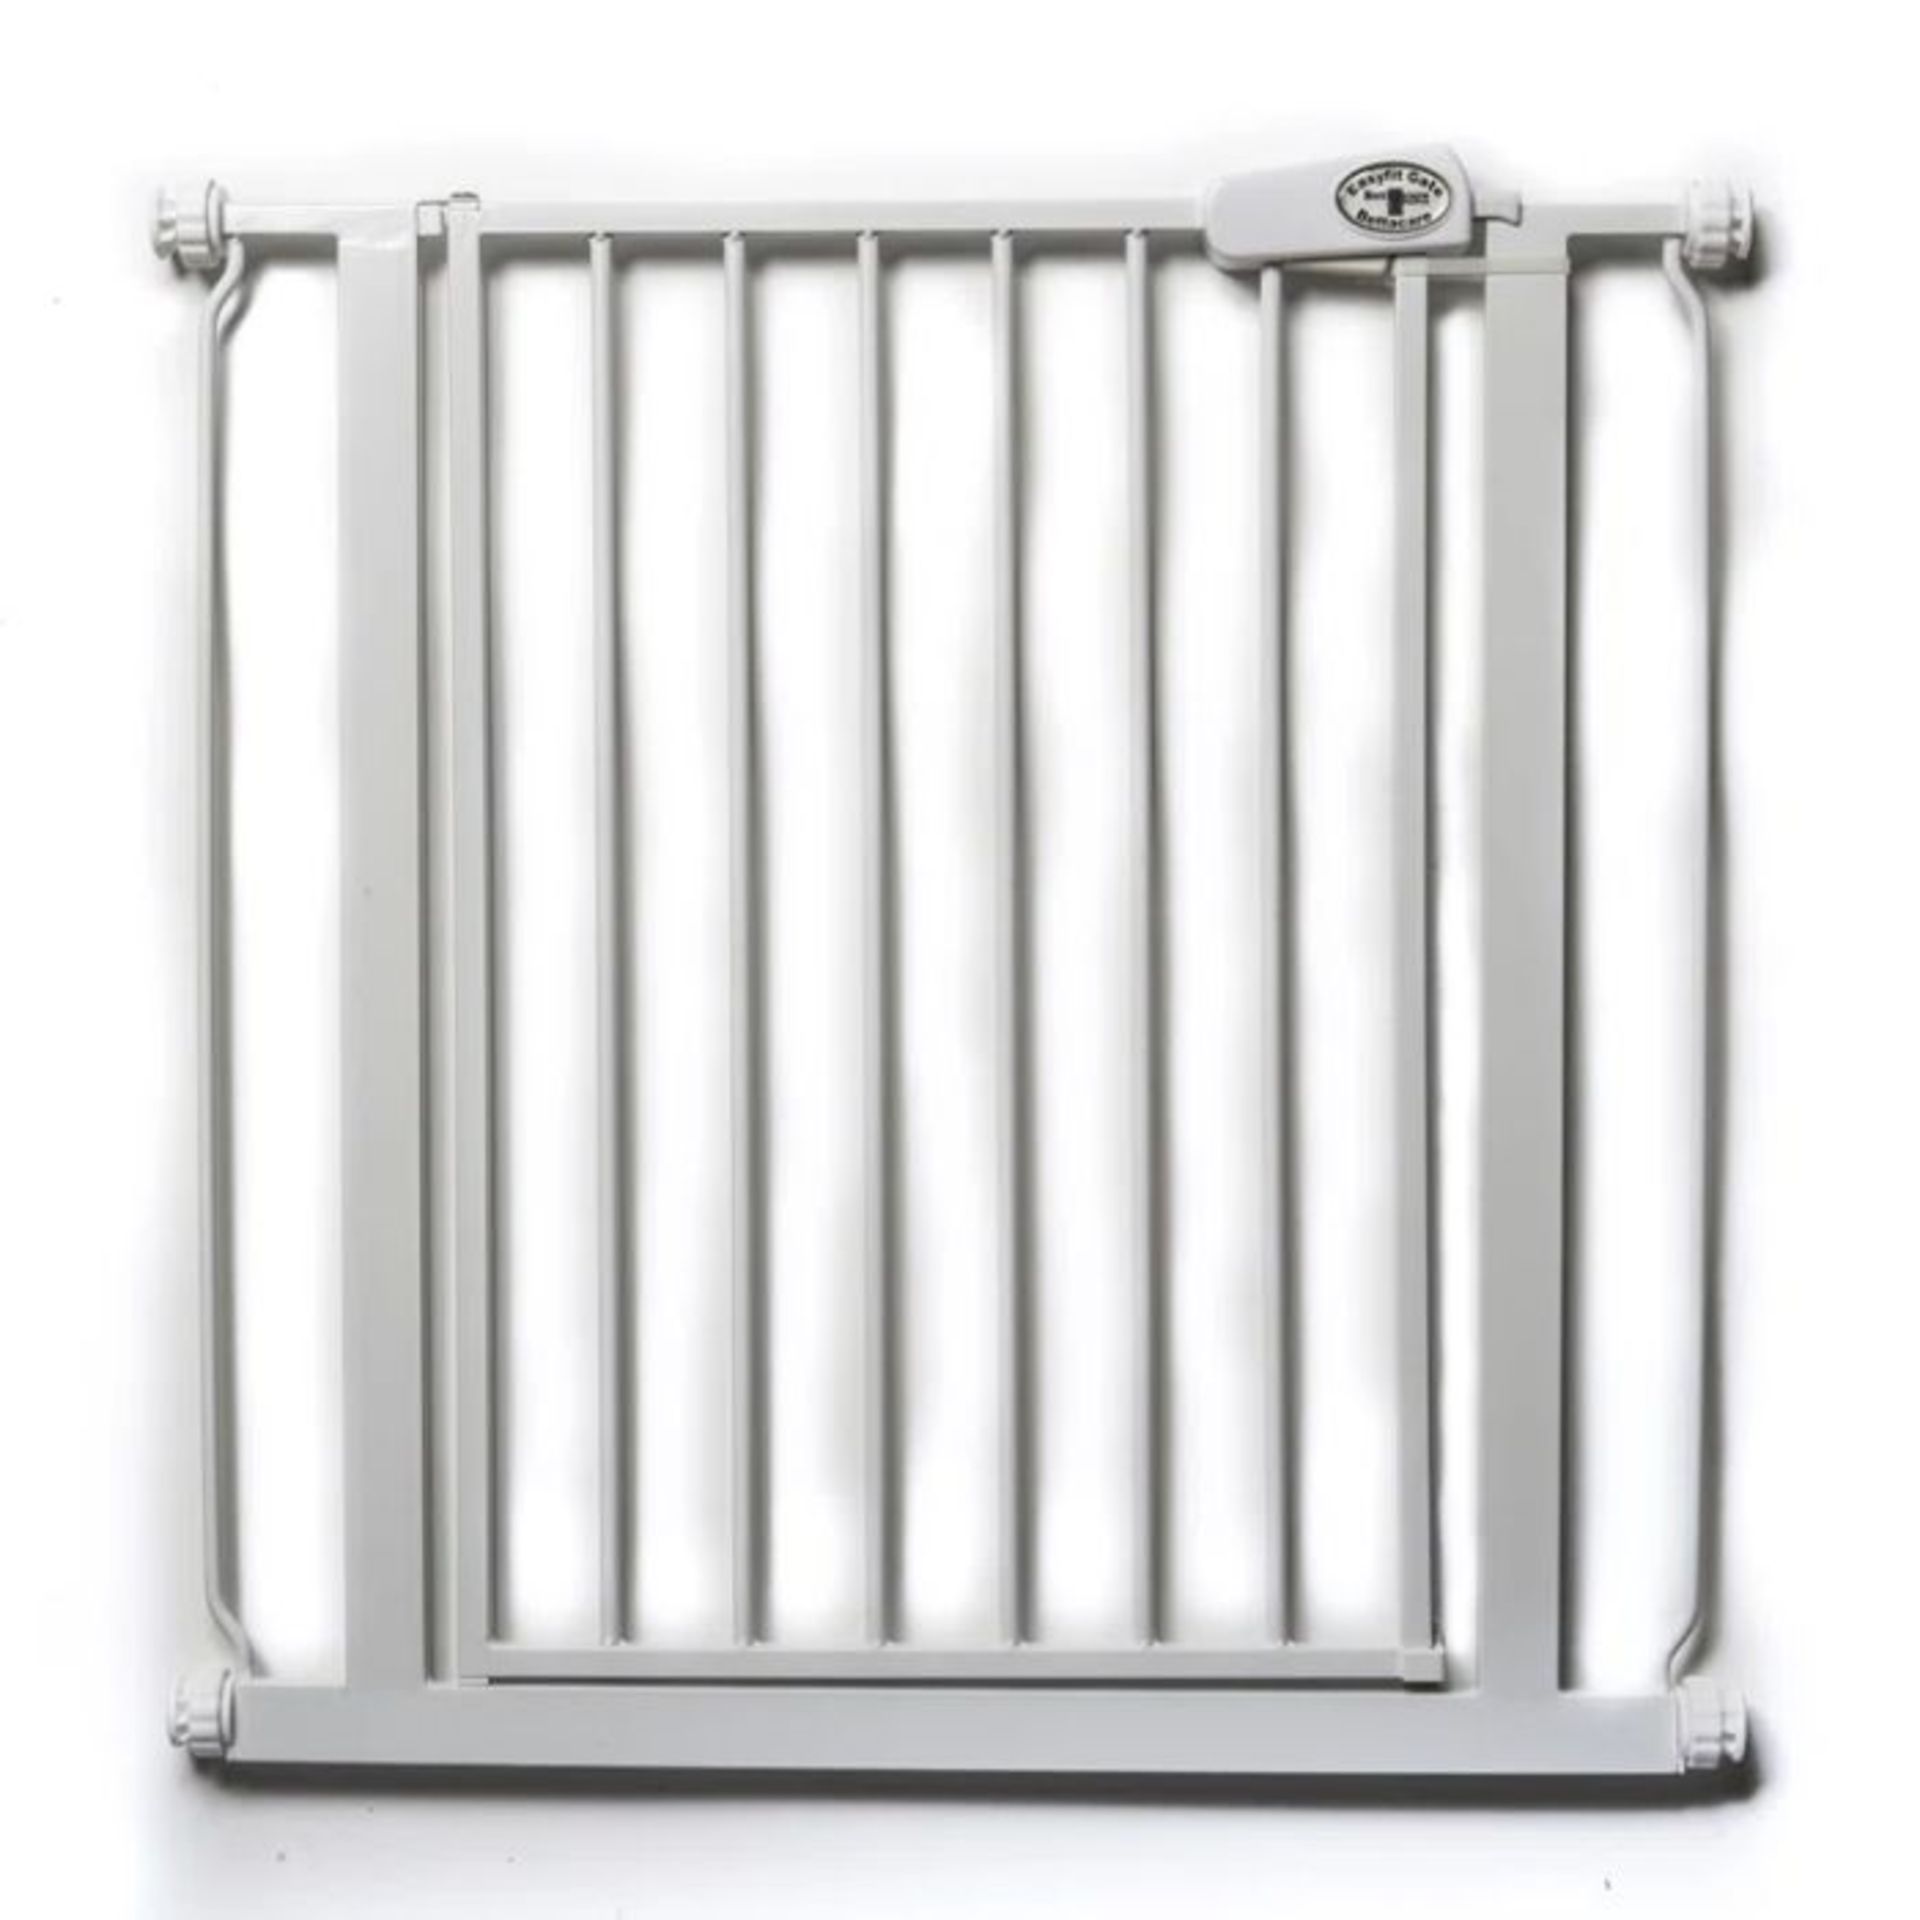 Symple Stuff, Easy Fit Safety Gate (WHITE FINISH) (75cm - 83cm) - RRP £43.99(CCOO4123 - 29538/28)